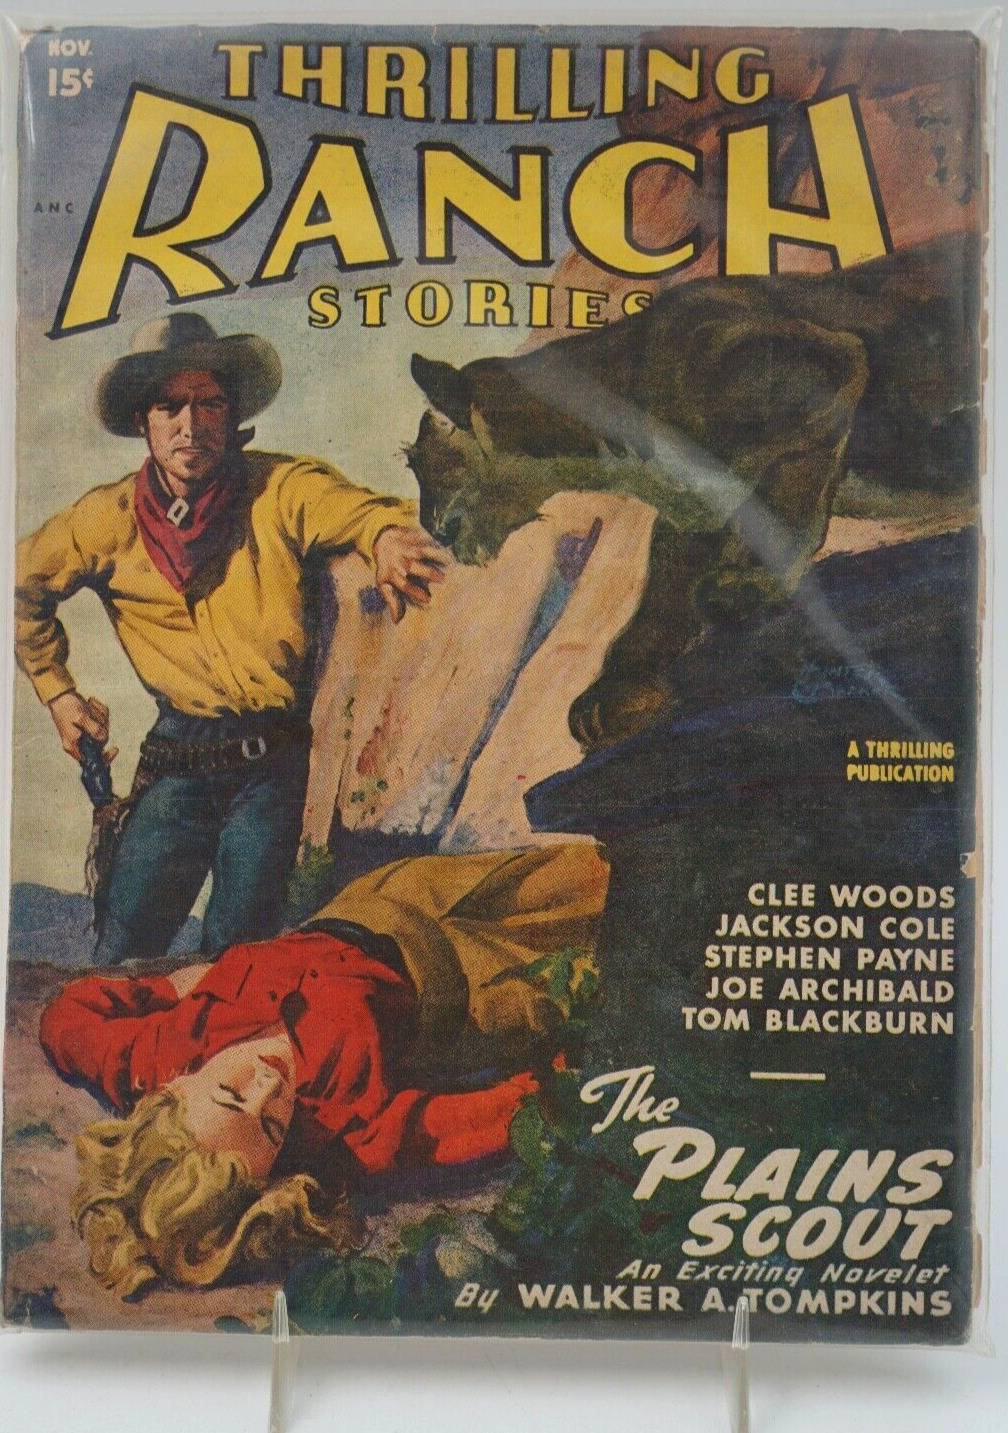 1947 - Thrilling Ranch Stories - Western Pulp Art Magazine - The Plains Scout